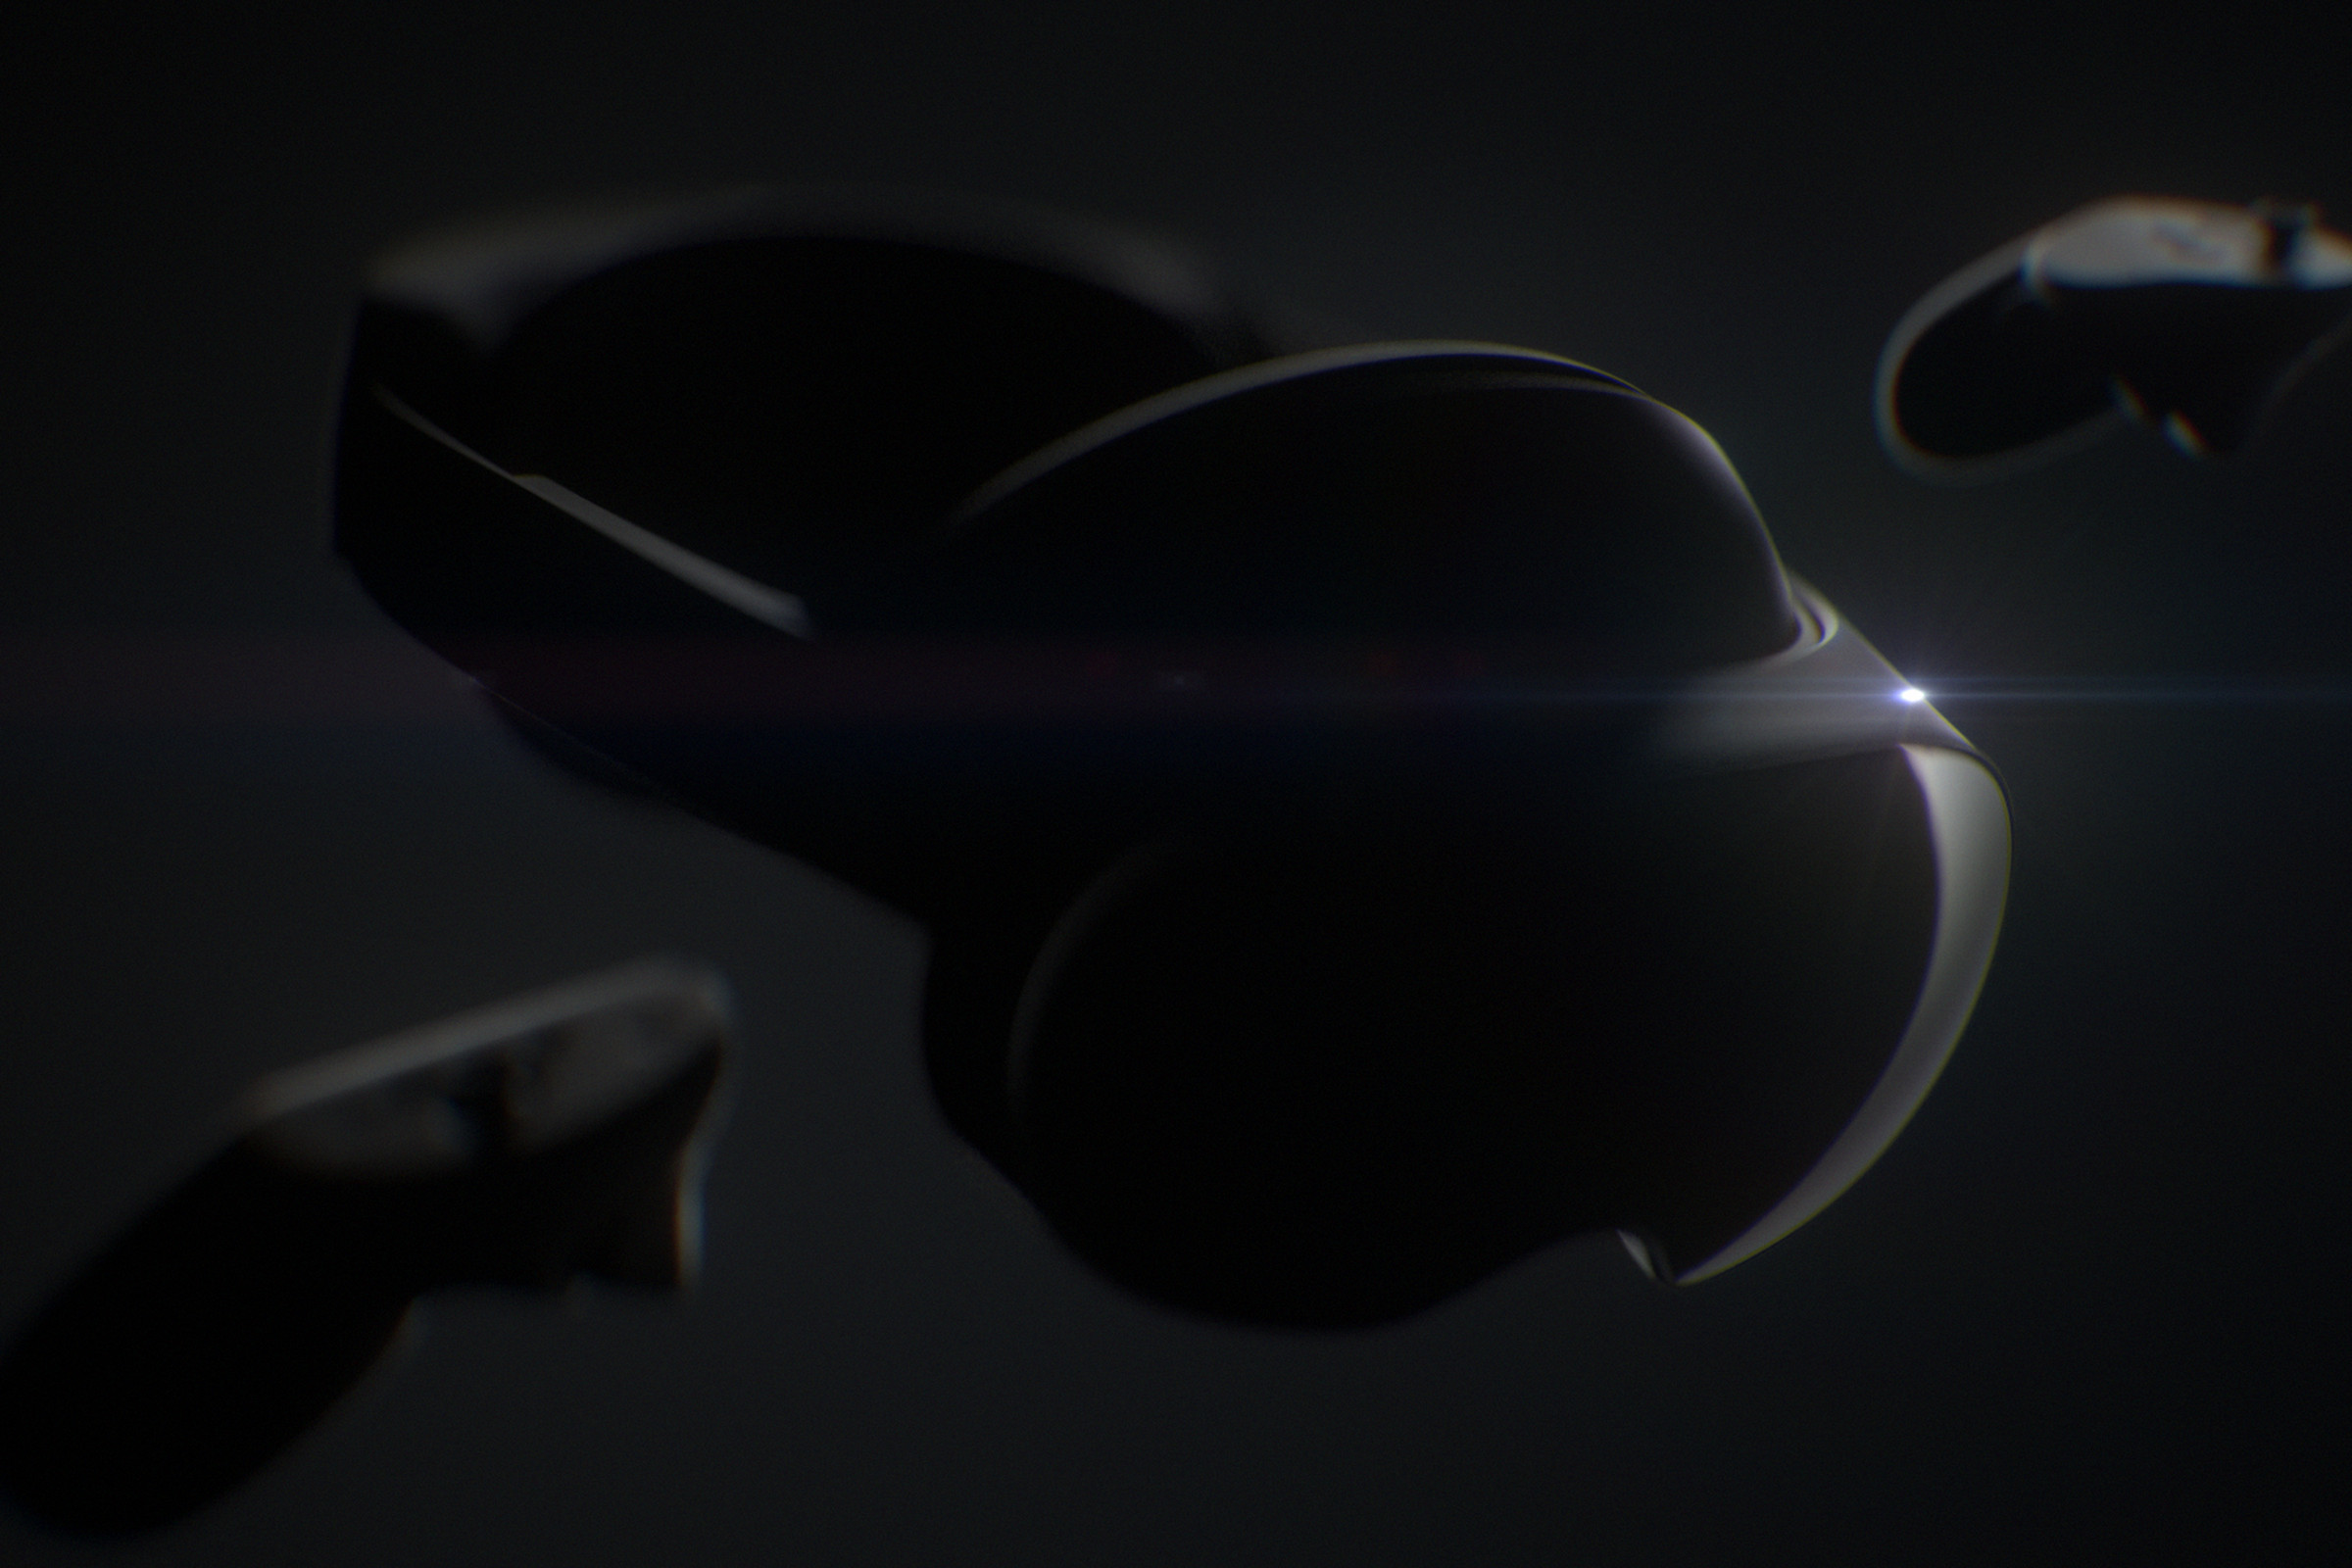 Teaser image of the Project Cambria headset